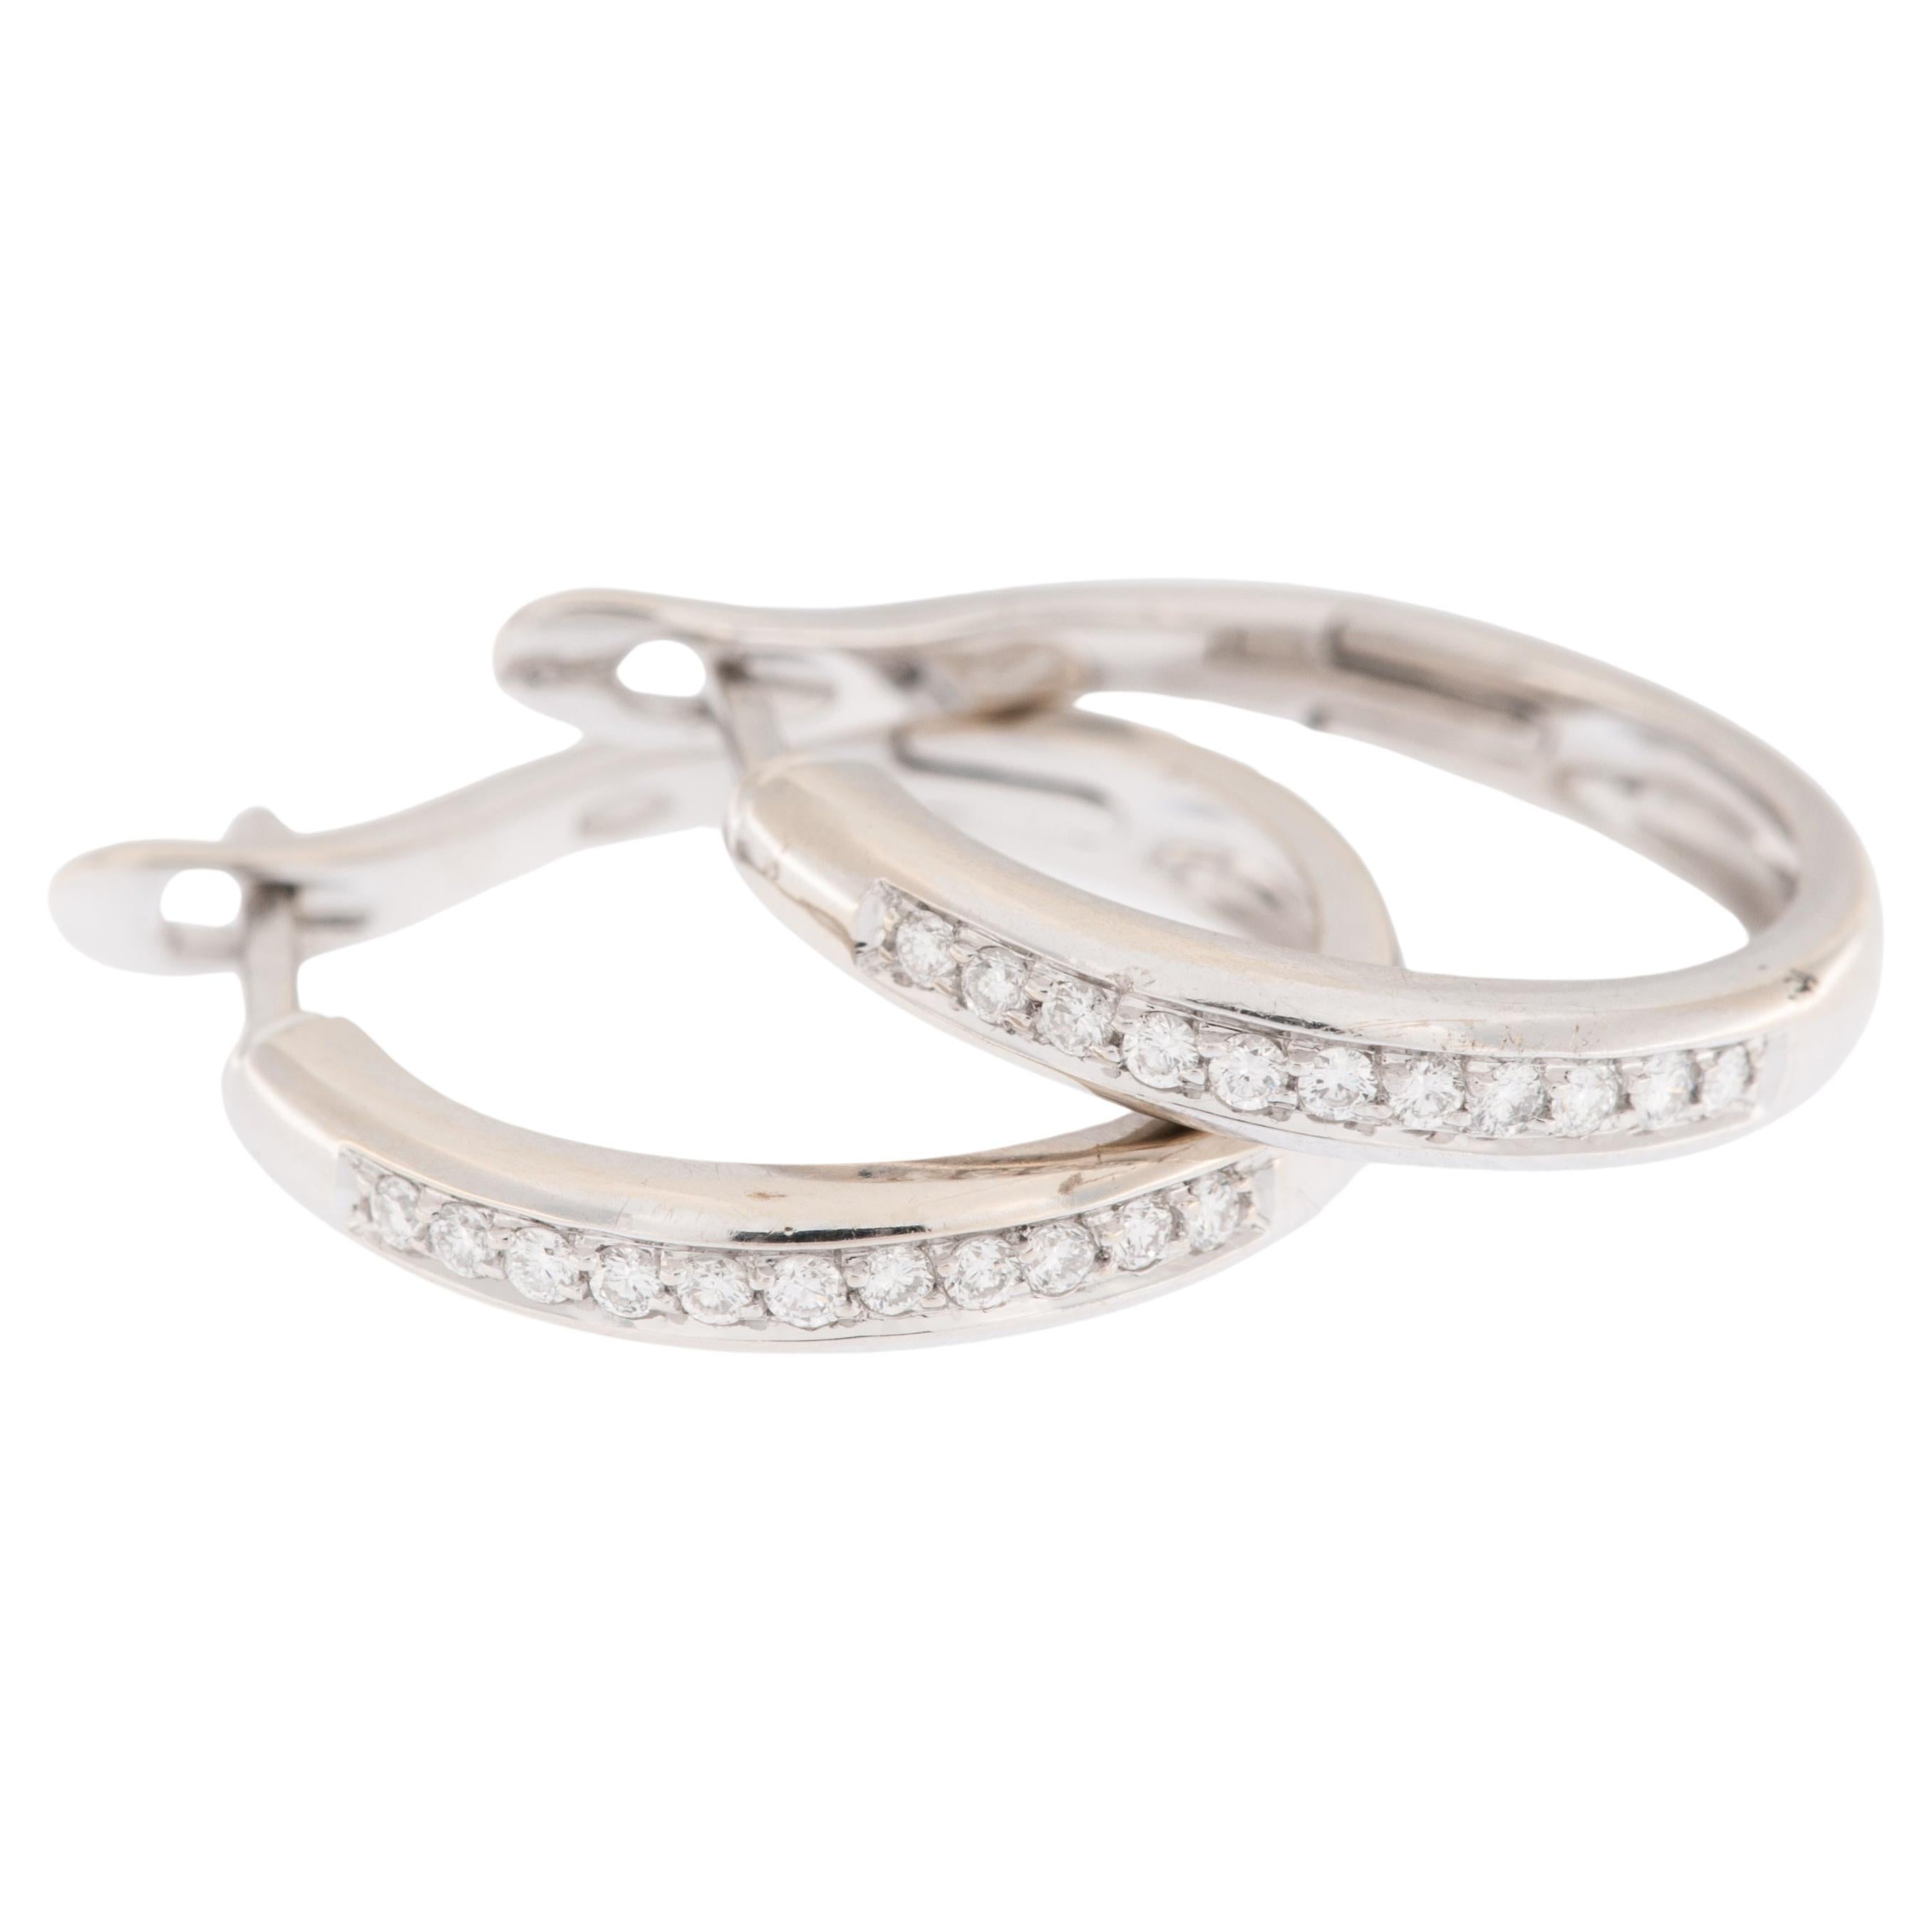 French 18kt White Gold Hoop Earrings with Diamonds